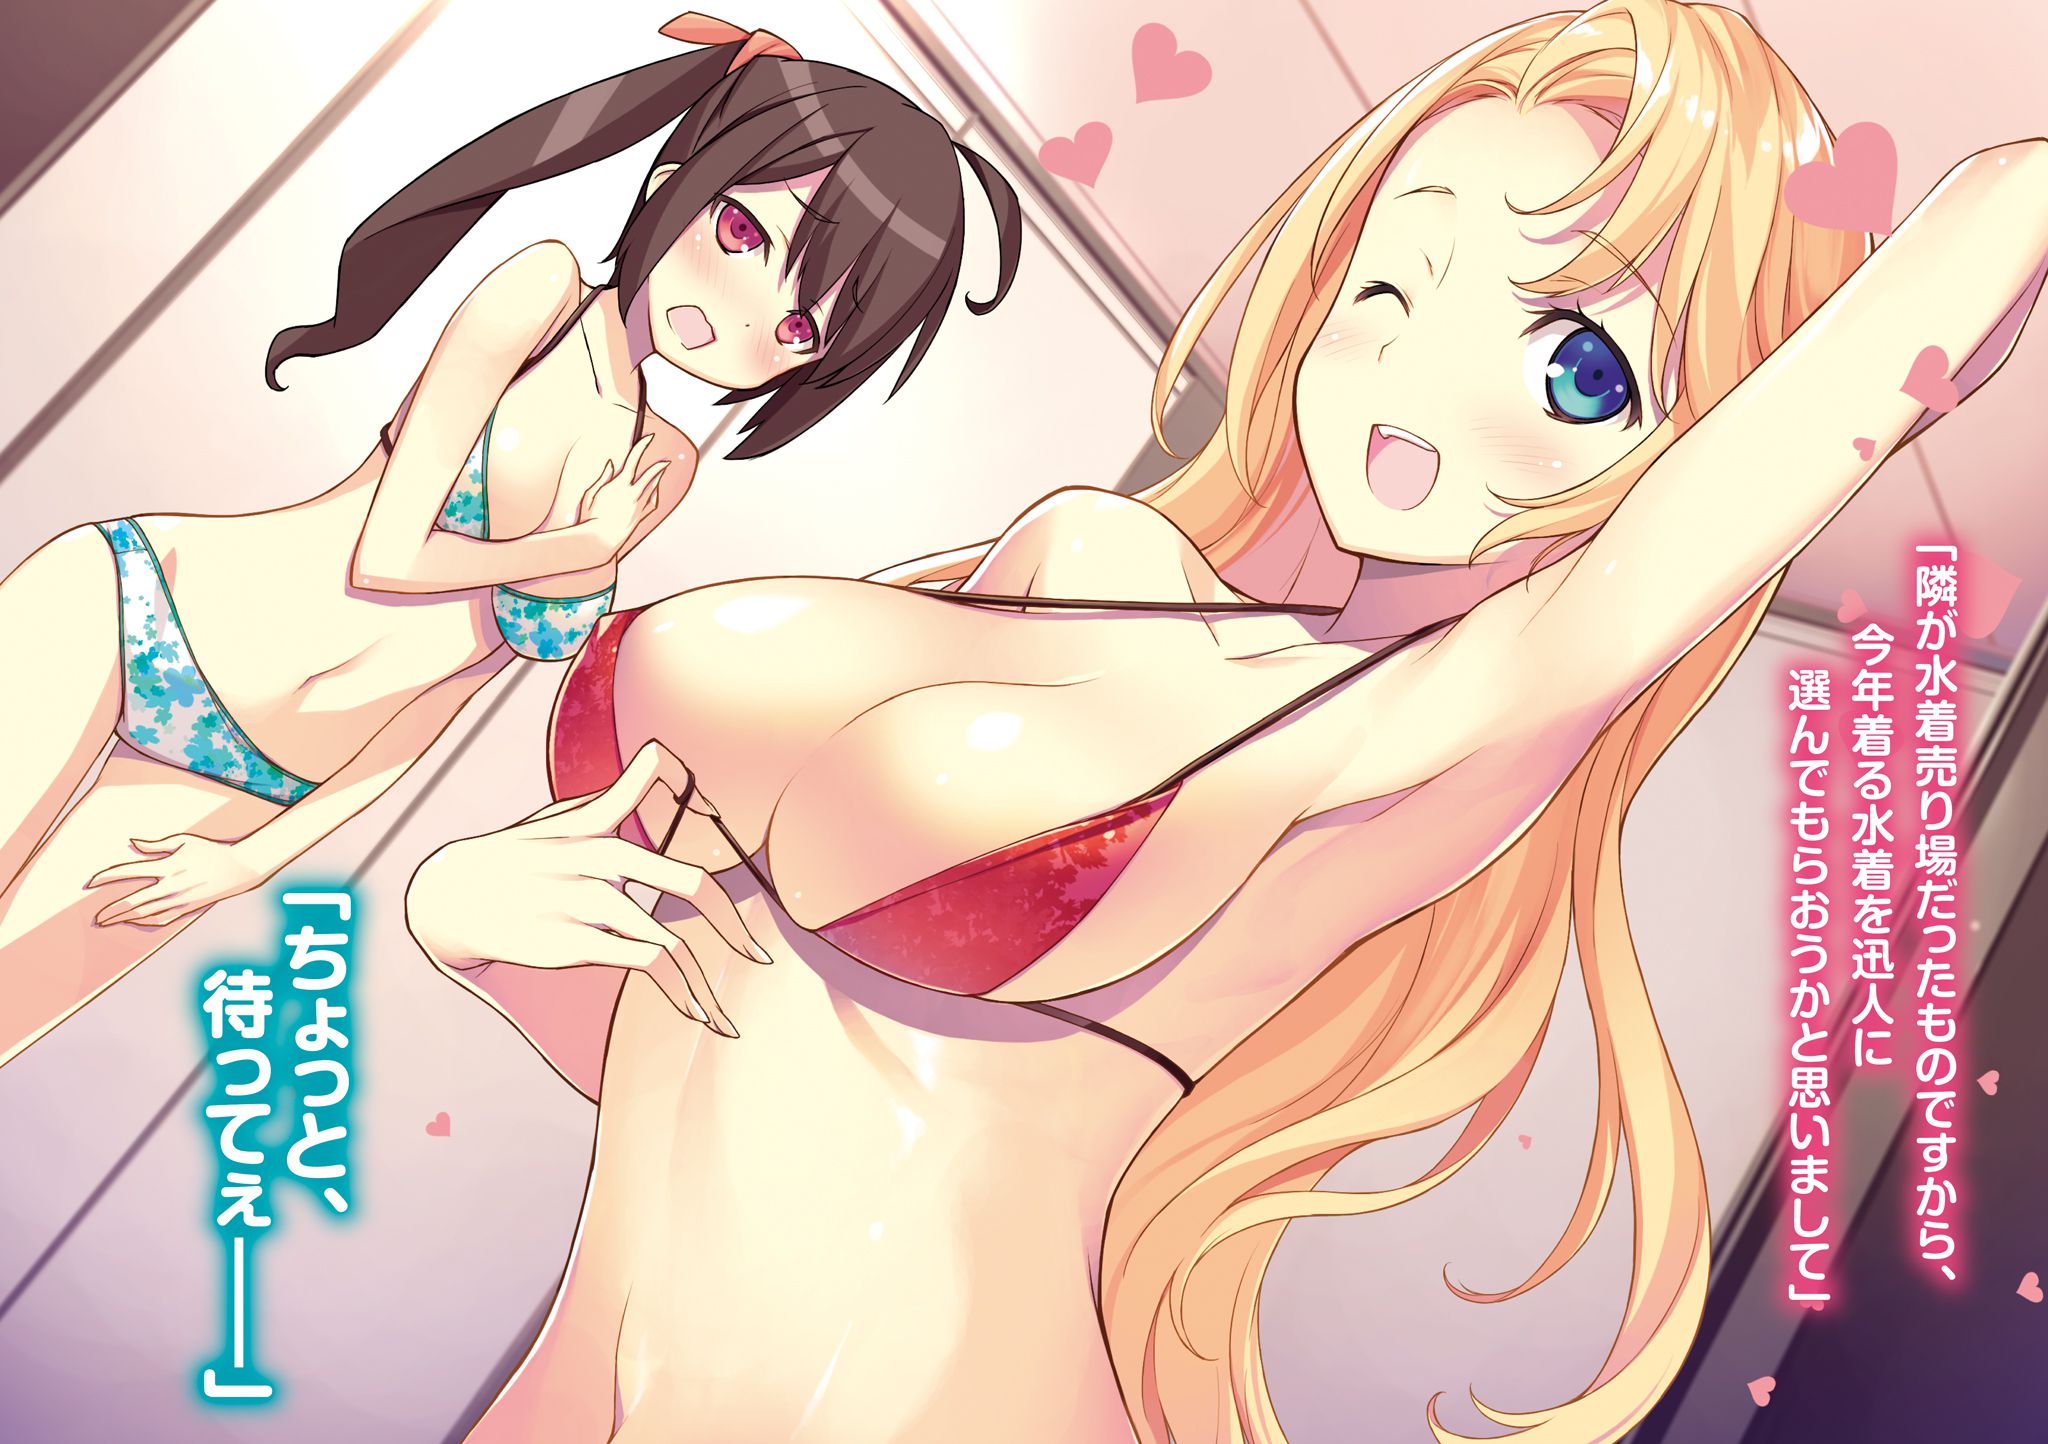 Two-dimensional erotic image for those who want to see two-dimensional erotic images of swimsuits of specially cute girls because it is New Year's Eve 24